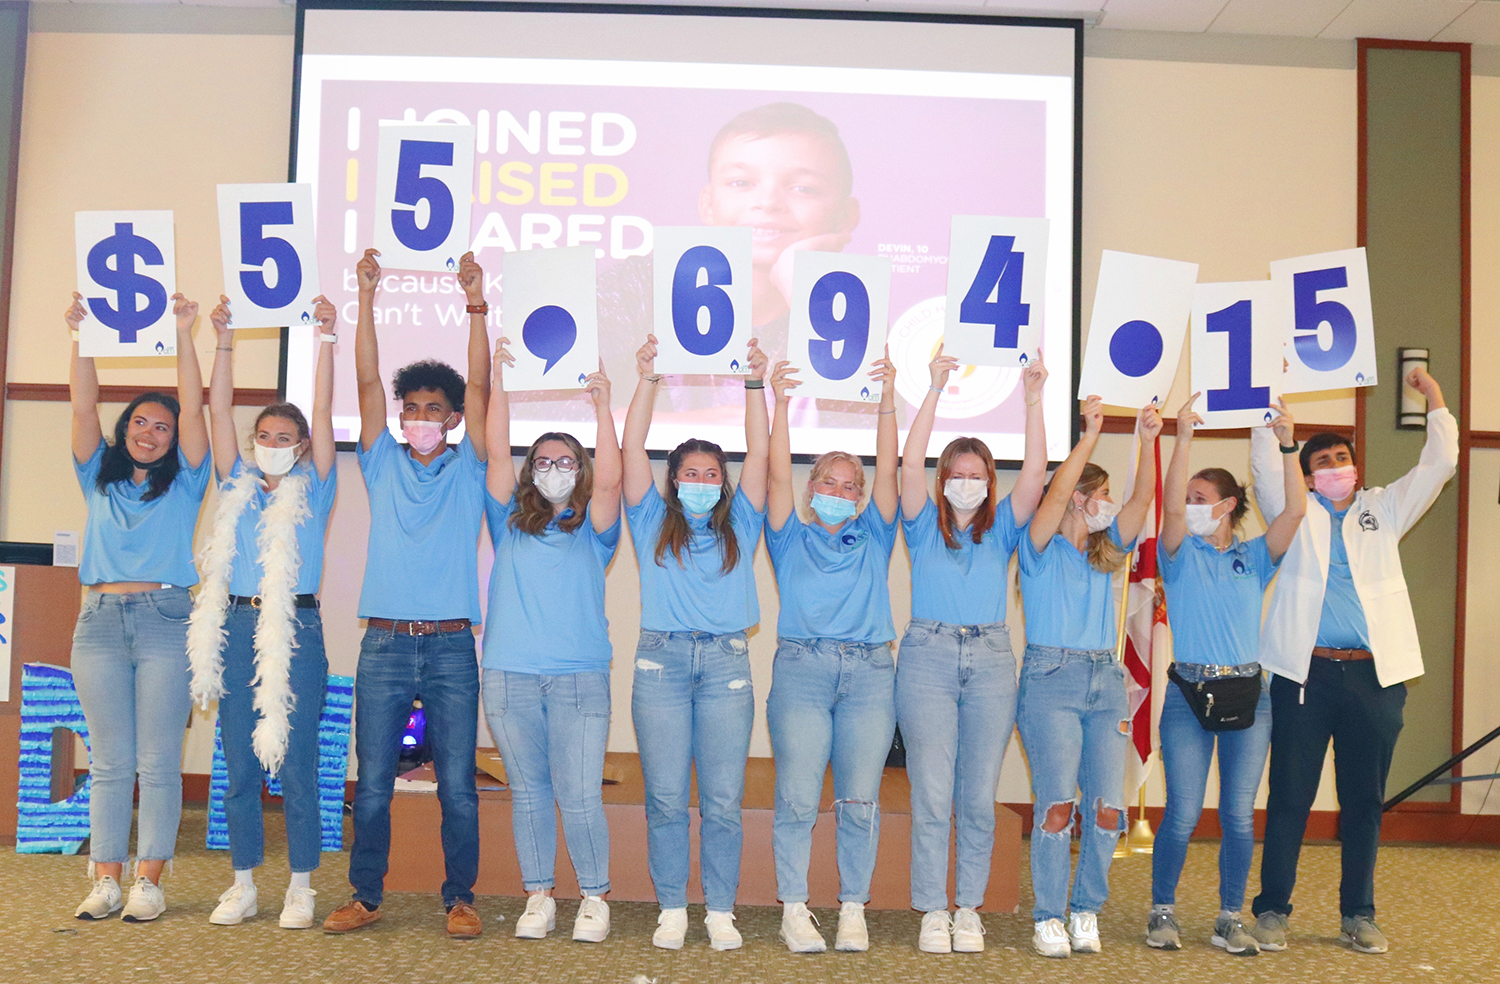 UWF students raised a grand total of $55,694.15 during the annual Dance Marathon at Studer Family Children’s Hospital at Ascension Sacred Heart